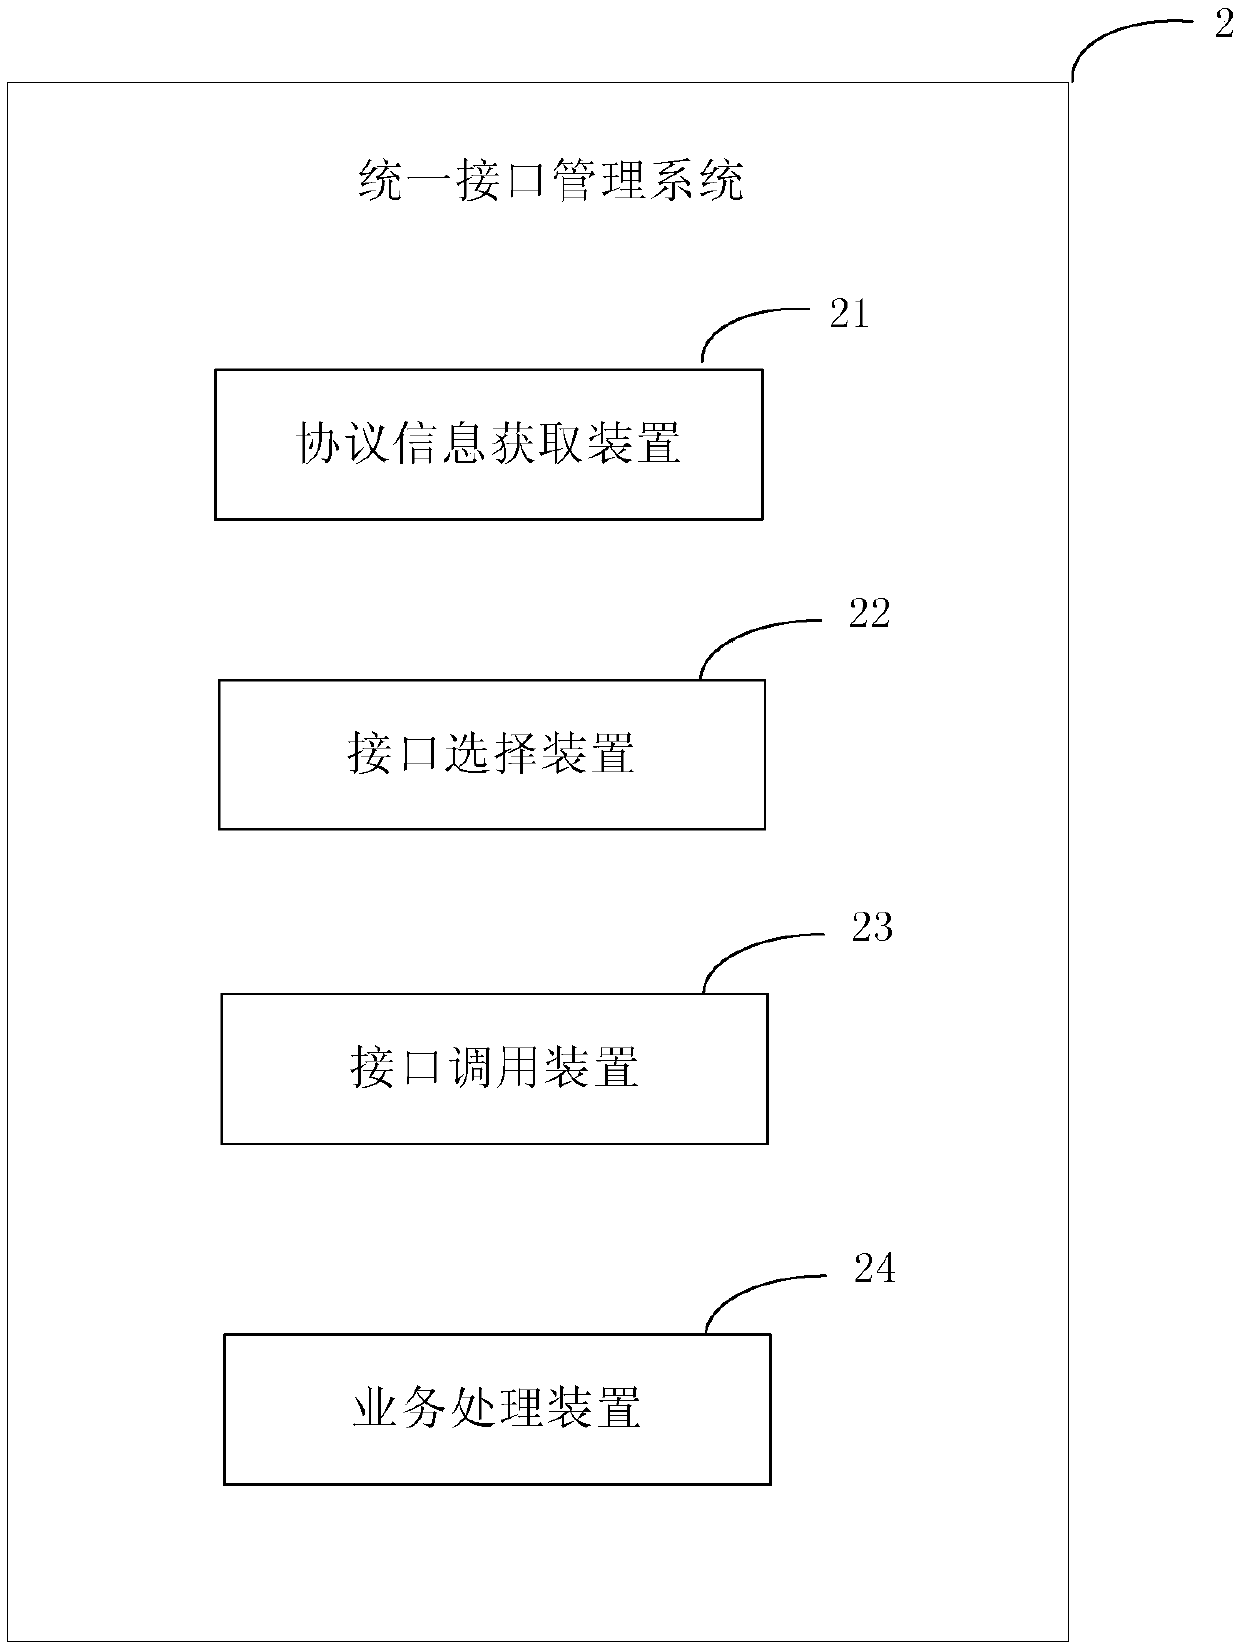 Uniform interface management method and system